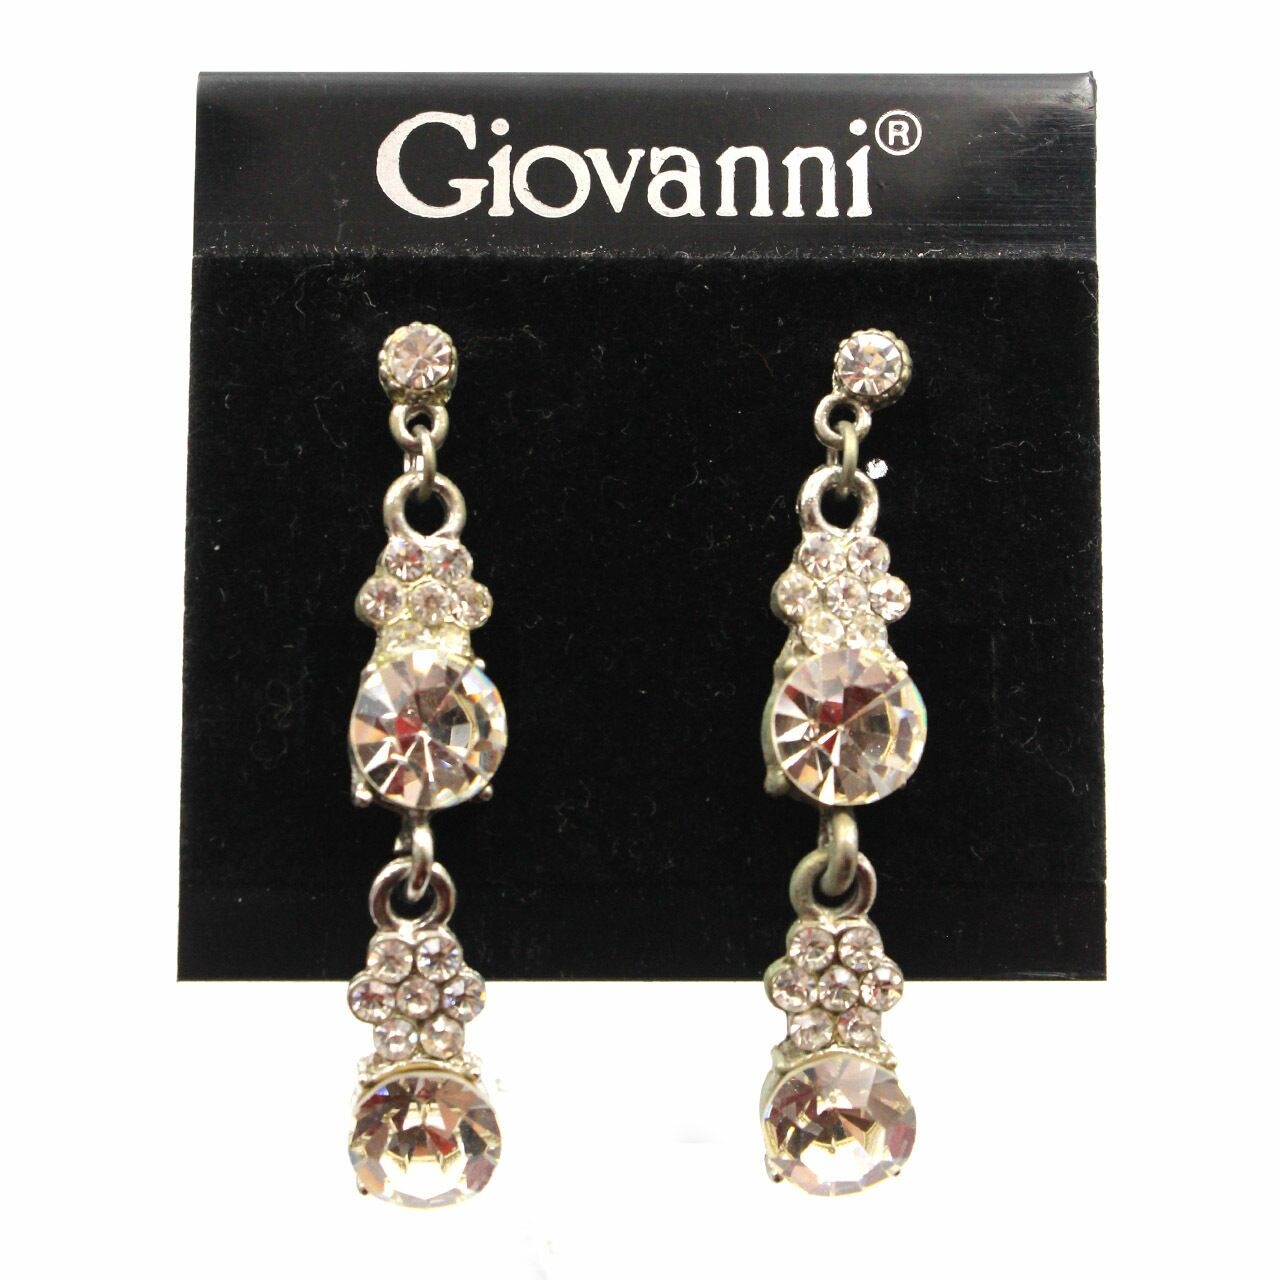 Giovanni Silver Earring Jewelry